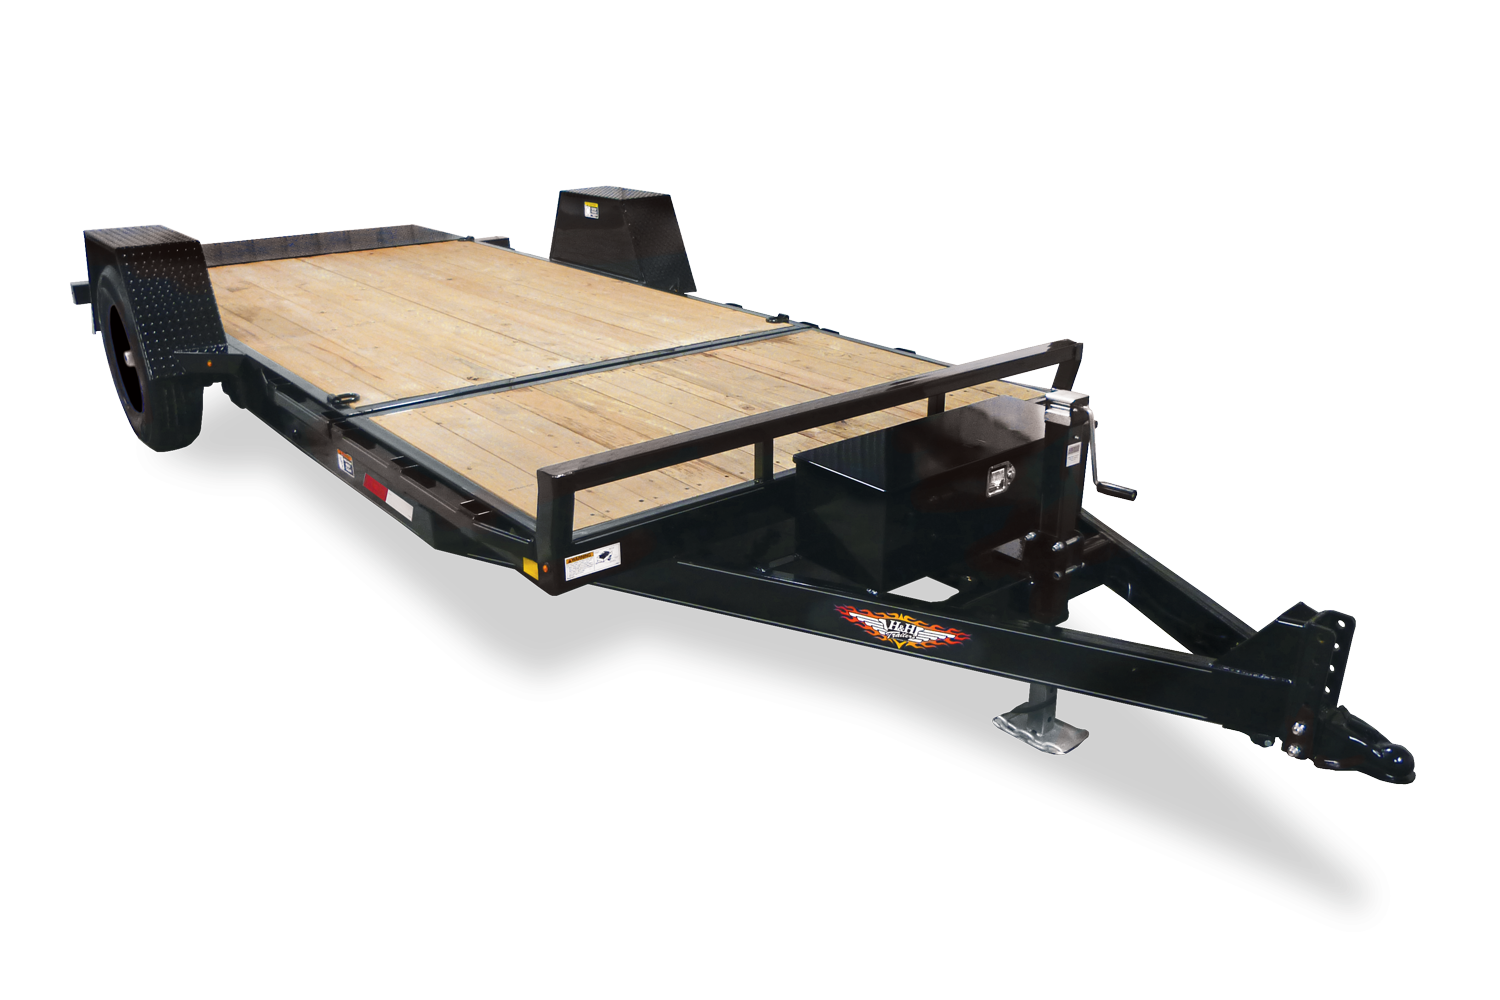 HH Trailer | Products | Trailers | Featured Image | 4' Stationary Deck view on the Single Axle Gravity Tilt